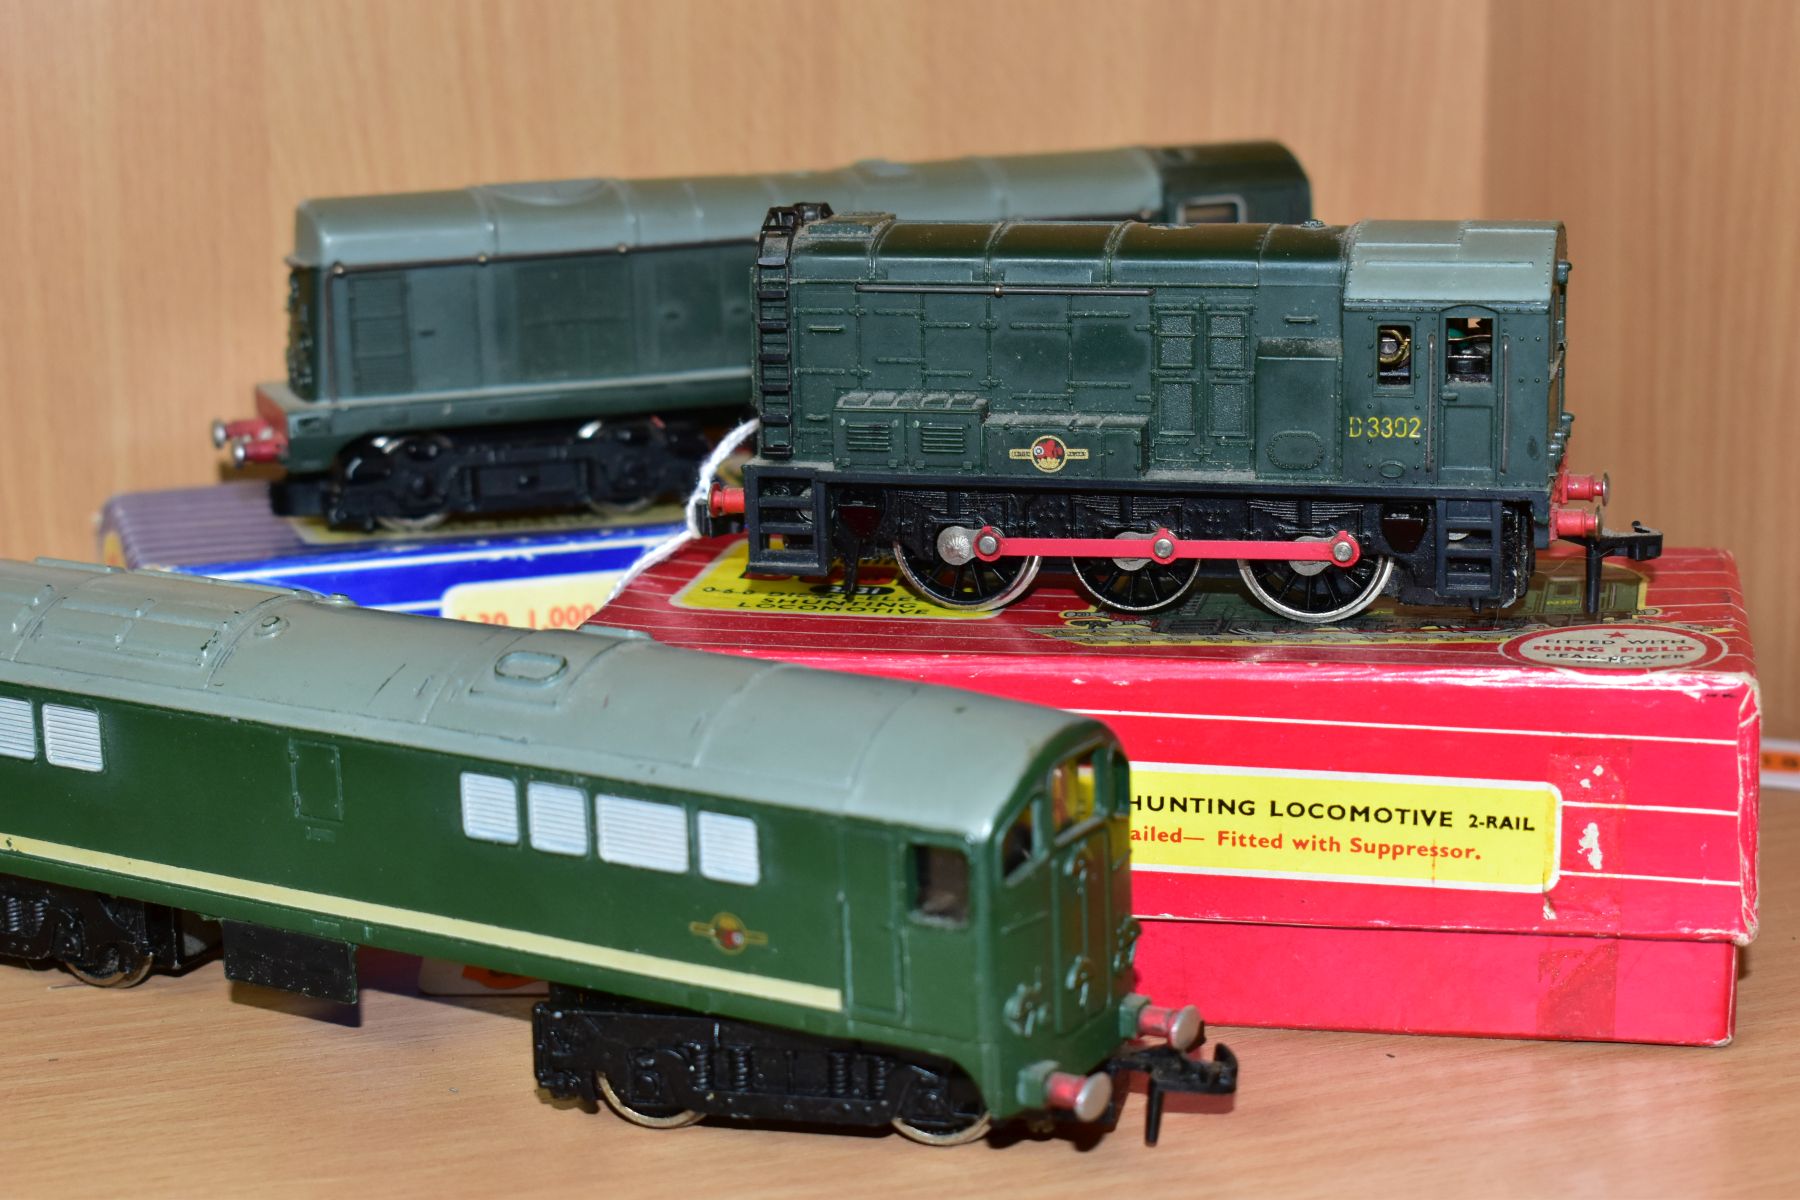 THREE HORNBY DUBLO TWO RAIL LOCOMOTIVES, boxed class 20 No. D8017 (2230), boxed class 08 No. - Image 3 of 4